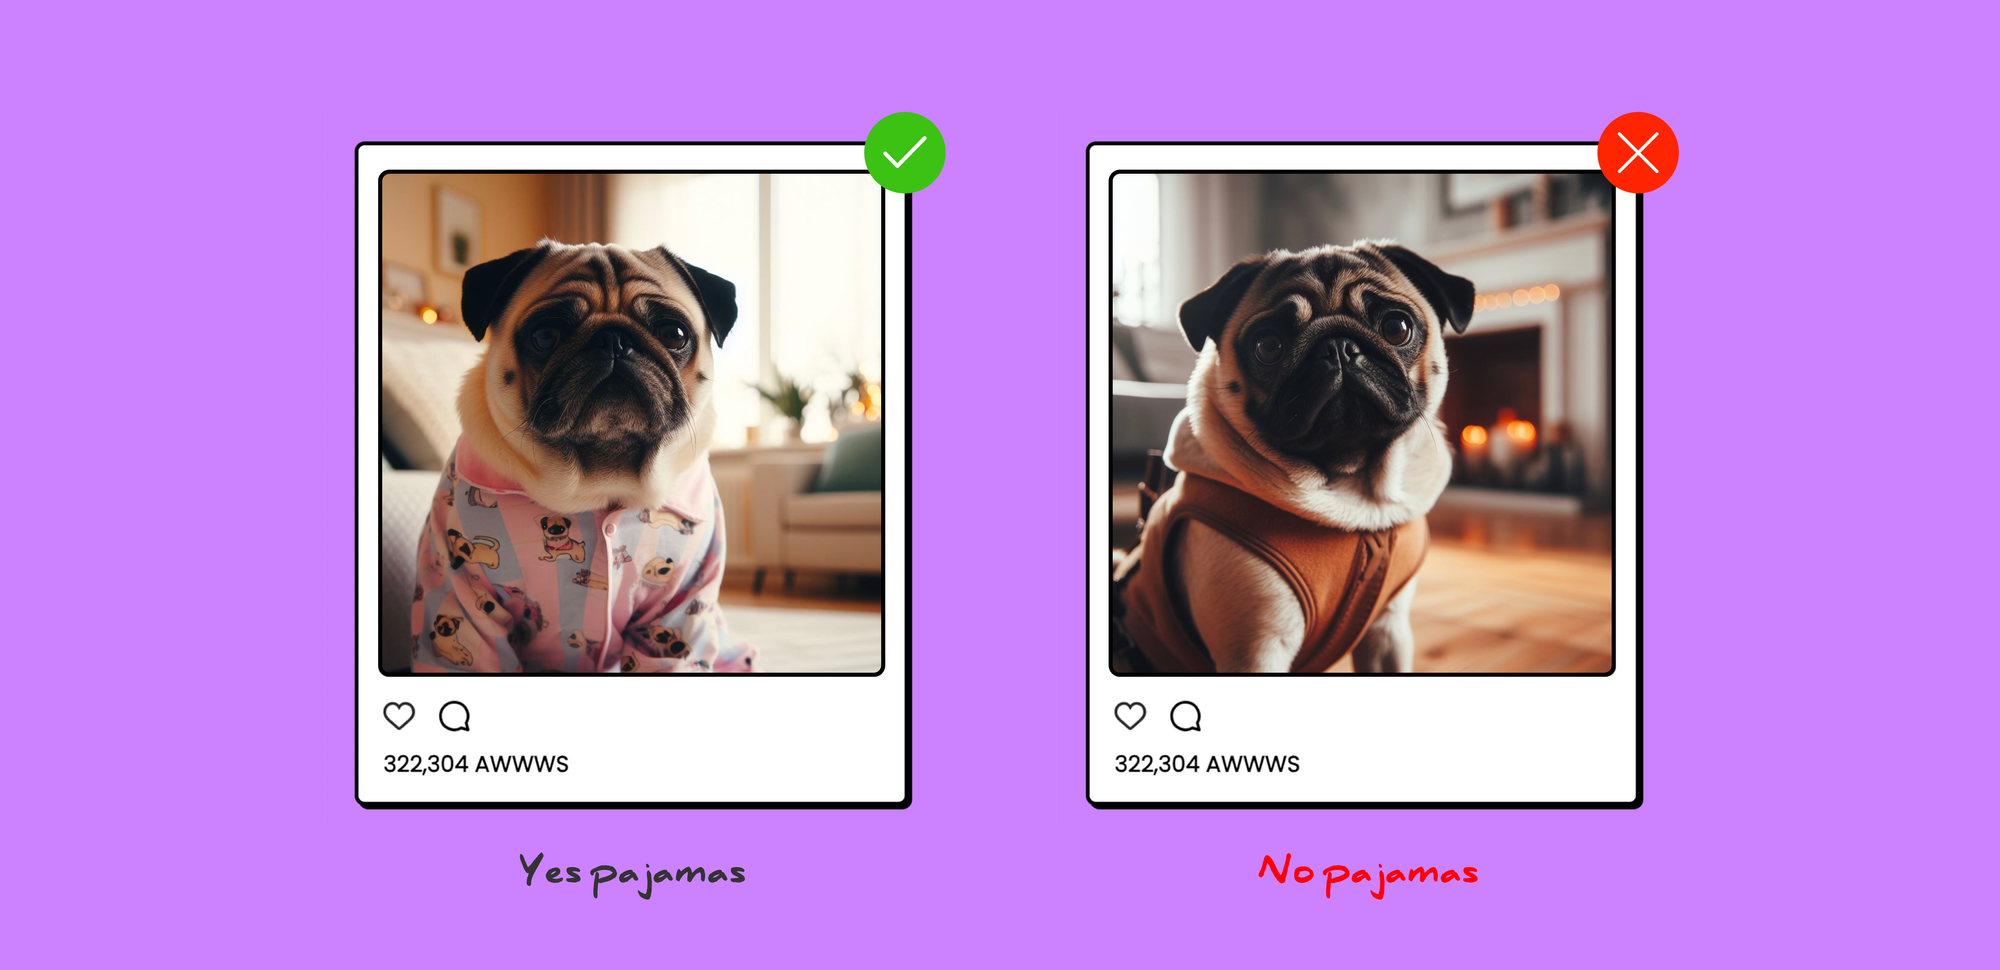 Two photographs. One shows a pug in pajamas (labelled 'Yes pajamas'). The other shows a pug in a harness (labelled 'No pajamas').